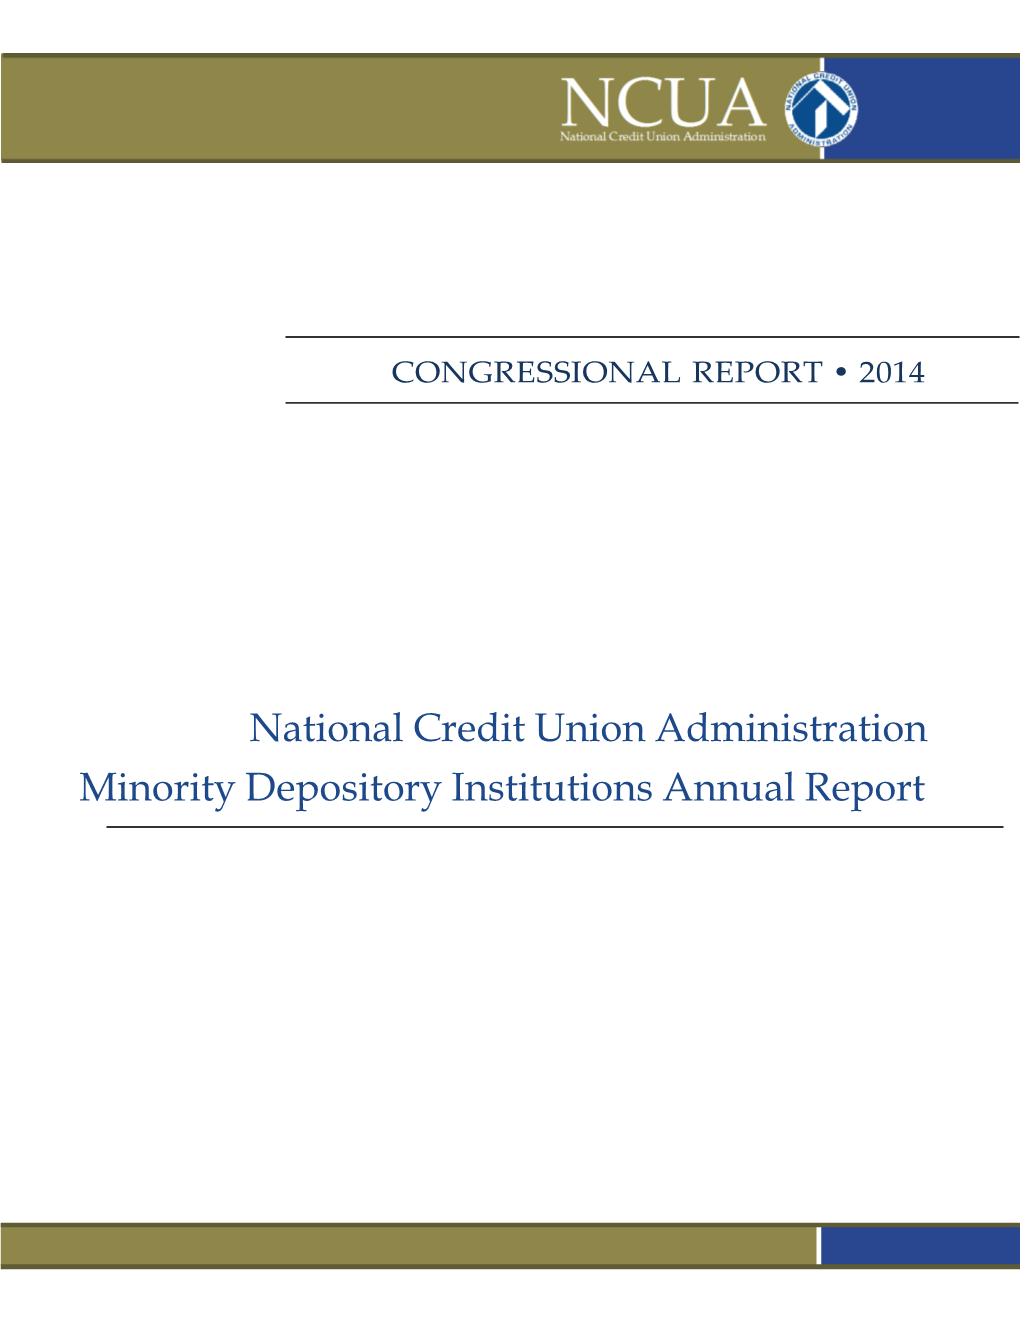 National Credit Union Administration Minority Depository Institutions Annual Report